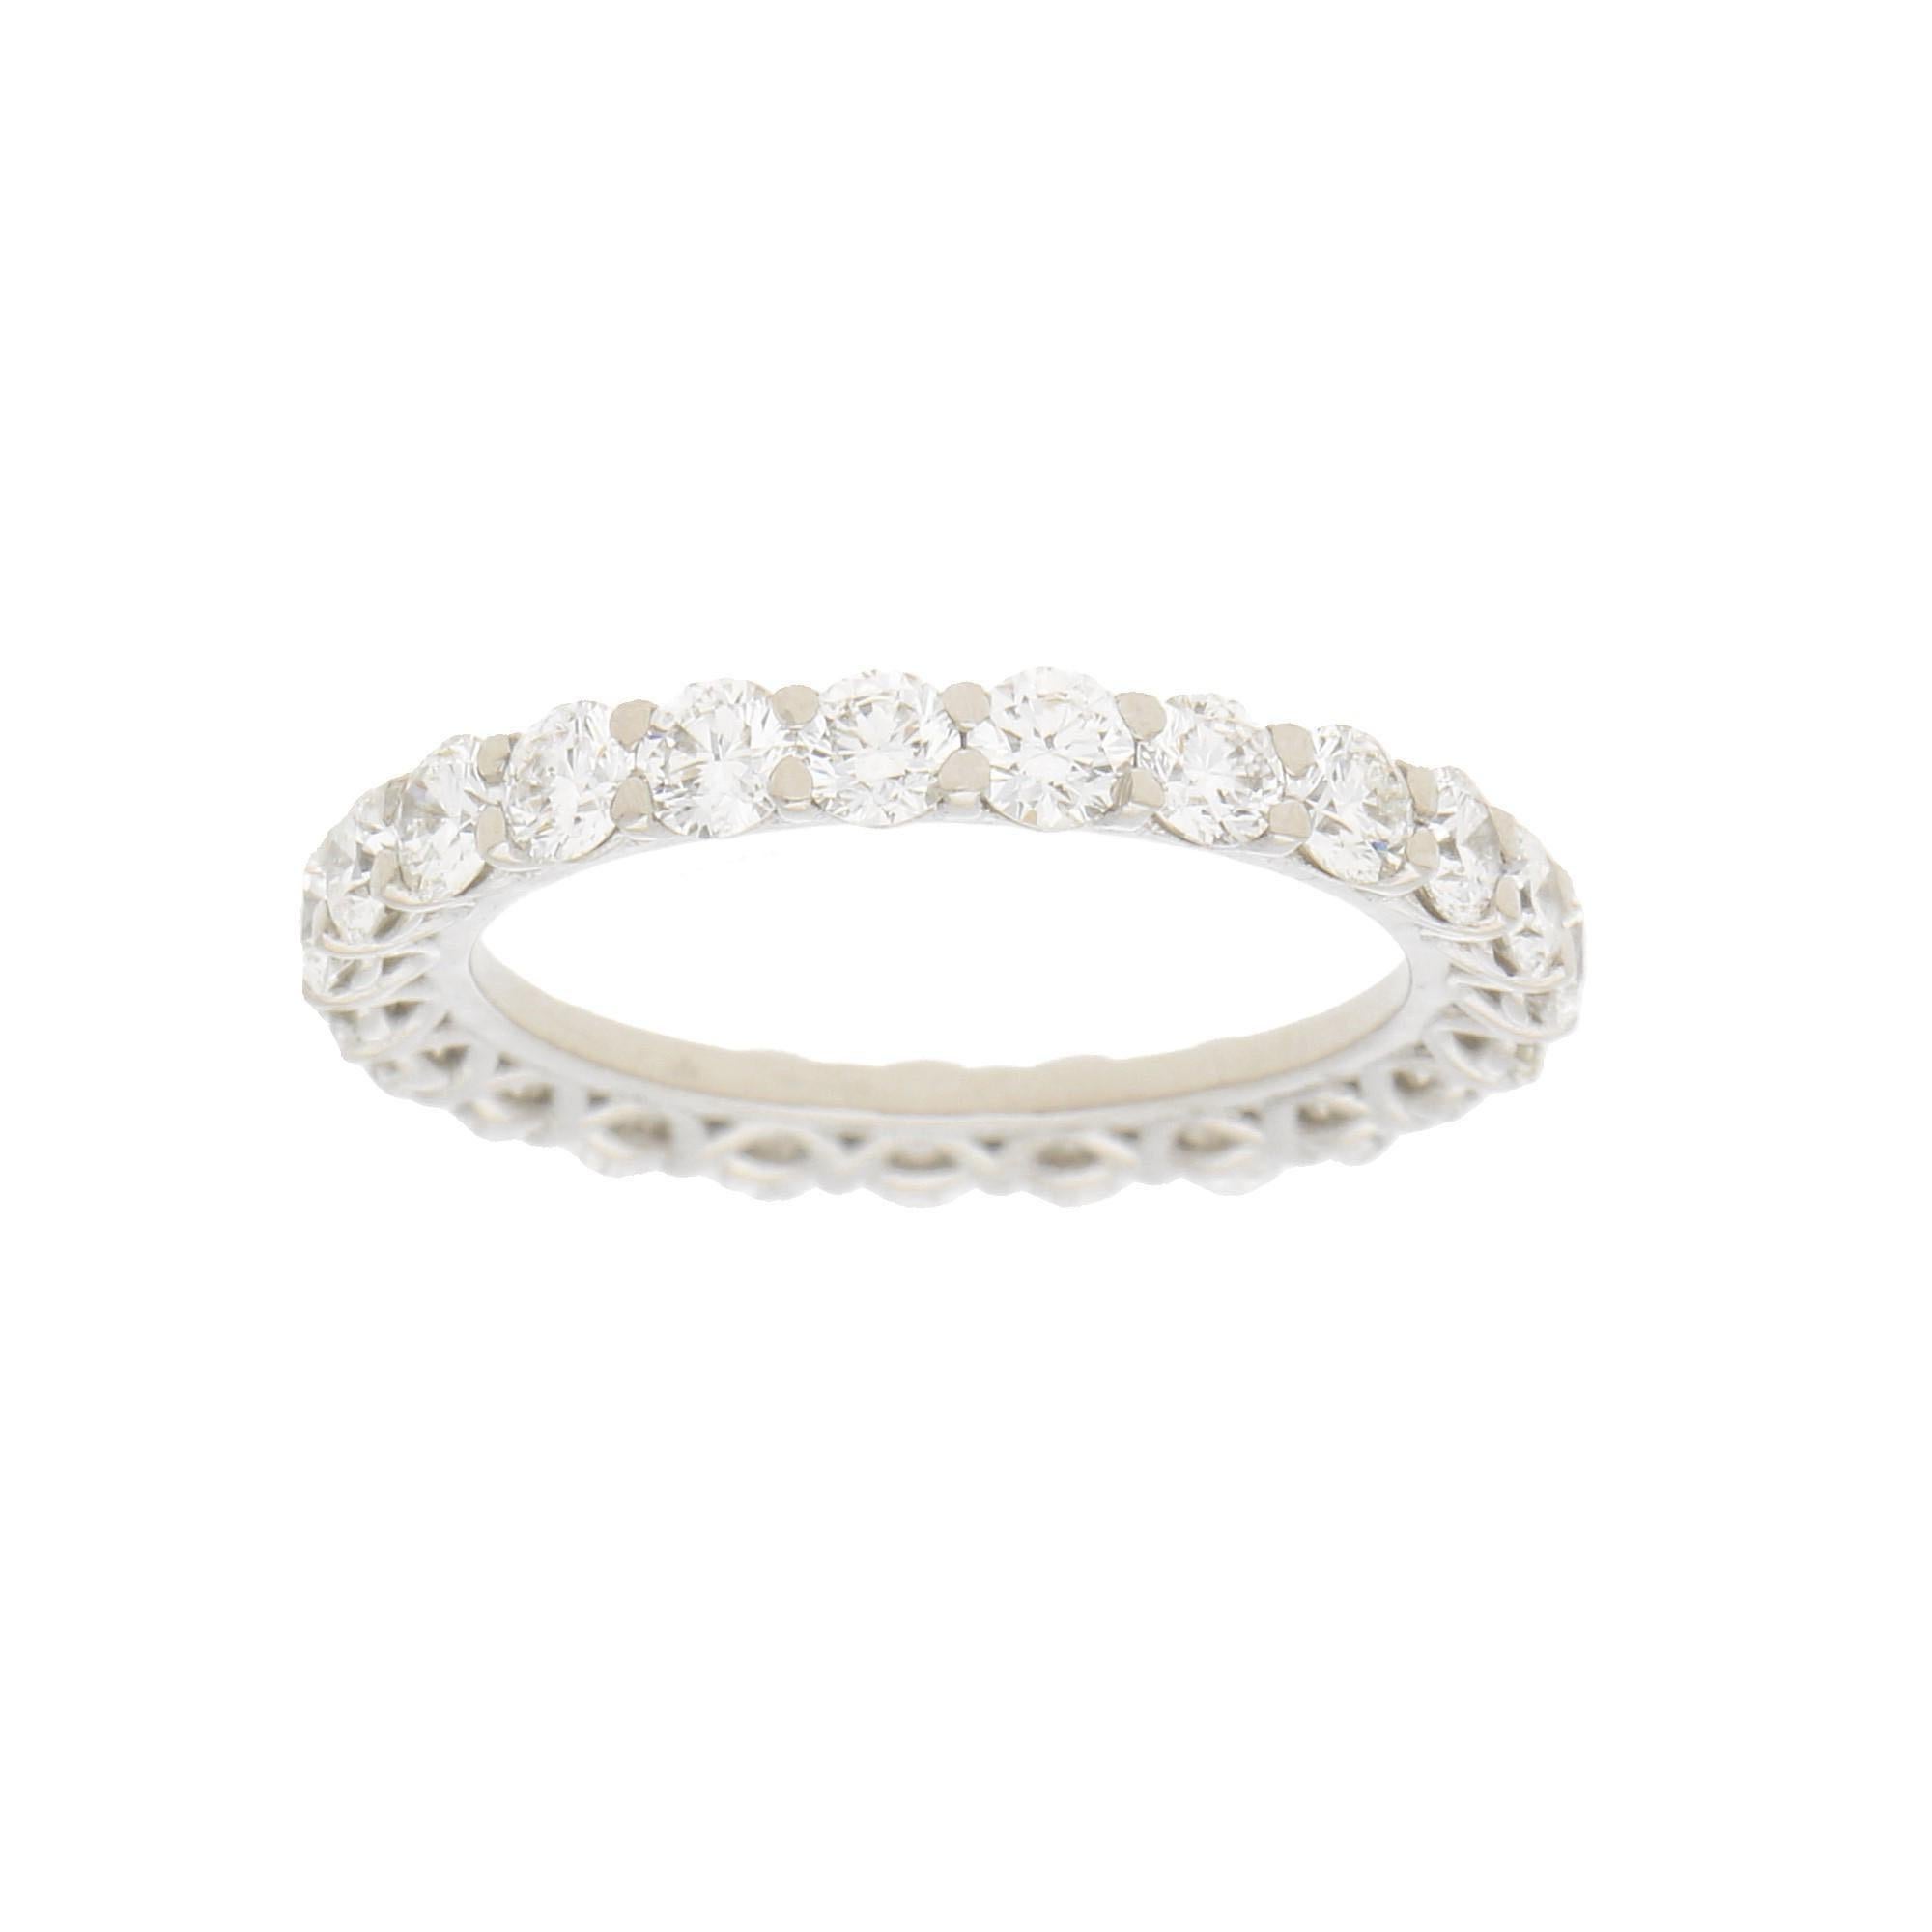 A truly remarkable full diamond eternity ring set in 18k white gold. The eternity ring is set with exactly 23 round brilliant diamonds in four claw settings. What makes this eternity ring so remarkable is the colour of the diamonds. All the diamonds